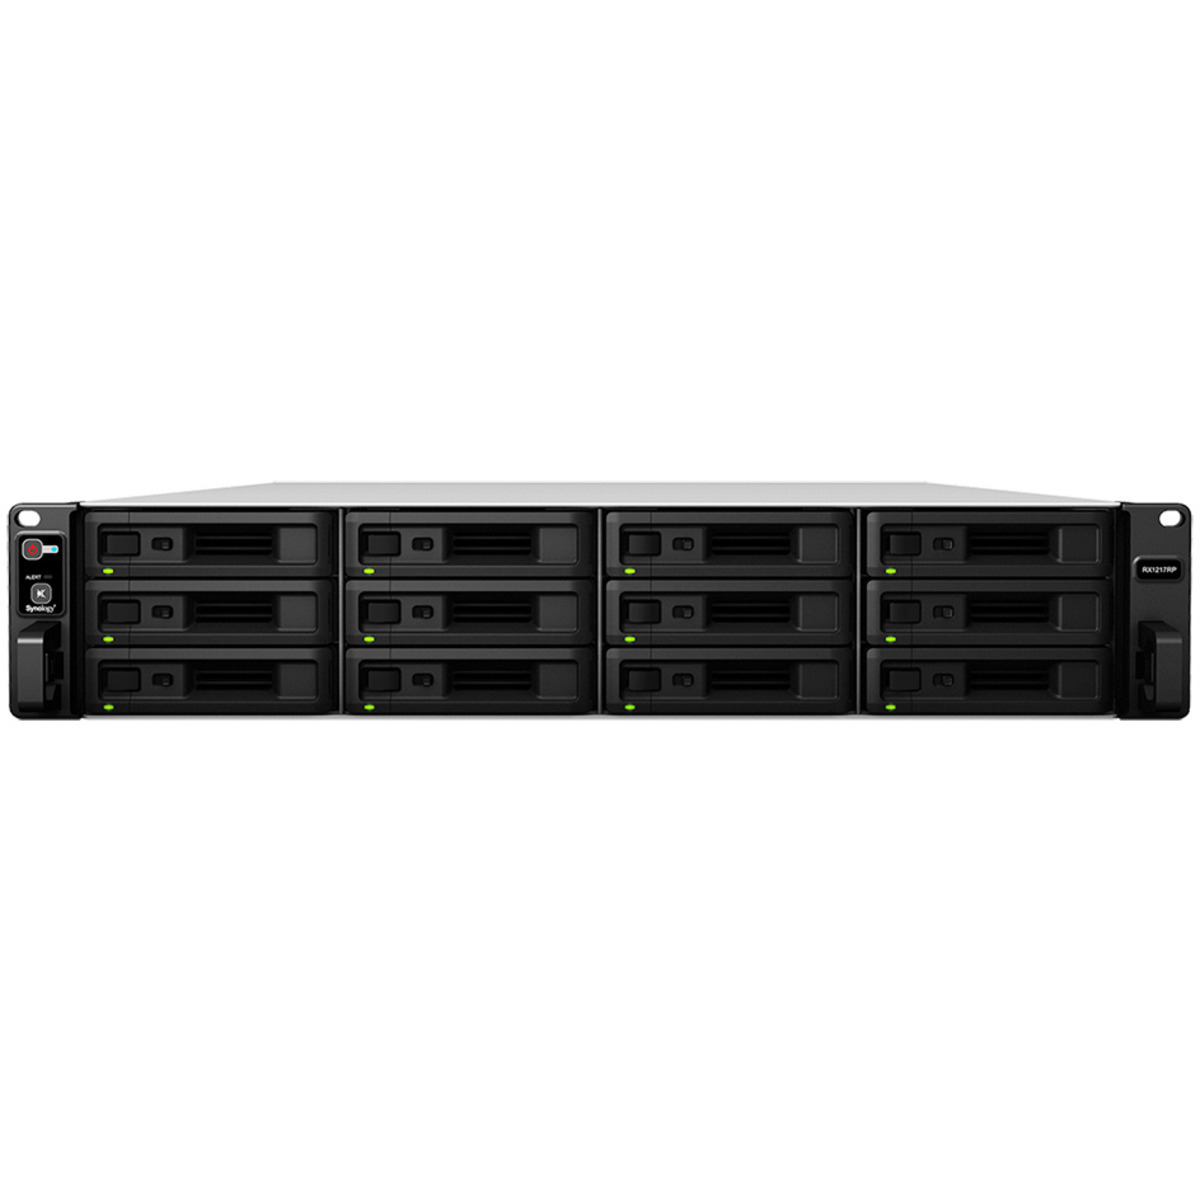 buy Synology RX1217 RackMount Expansion Enclosure Burn-In Tested Configurations - nas headquarters buy network attached storage server device das new raid-5 free shipping usa RX1217